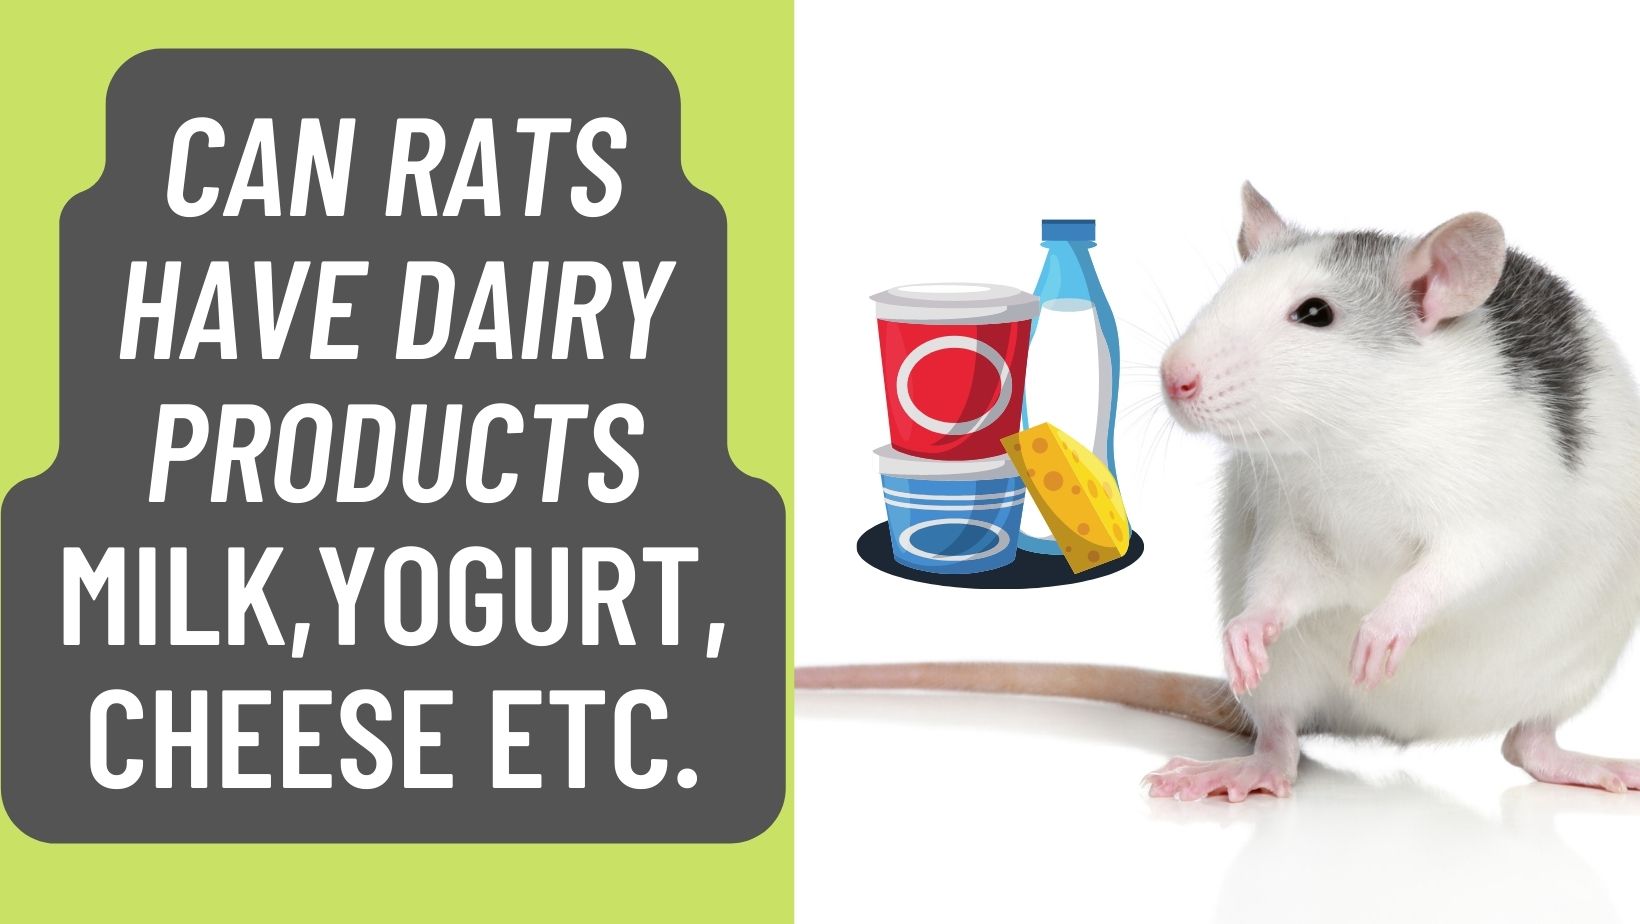 Can Rats Have Dairy Products like Milk,Yogurt,Cheese